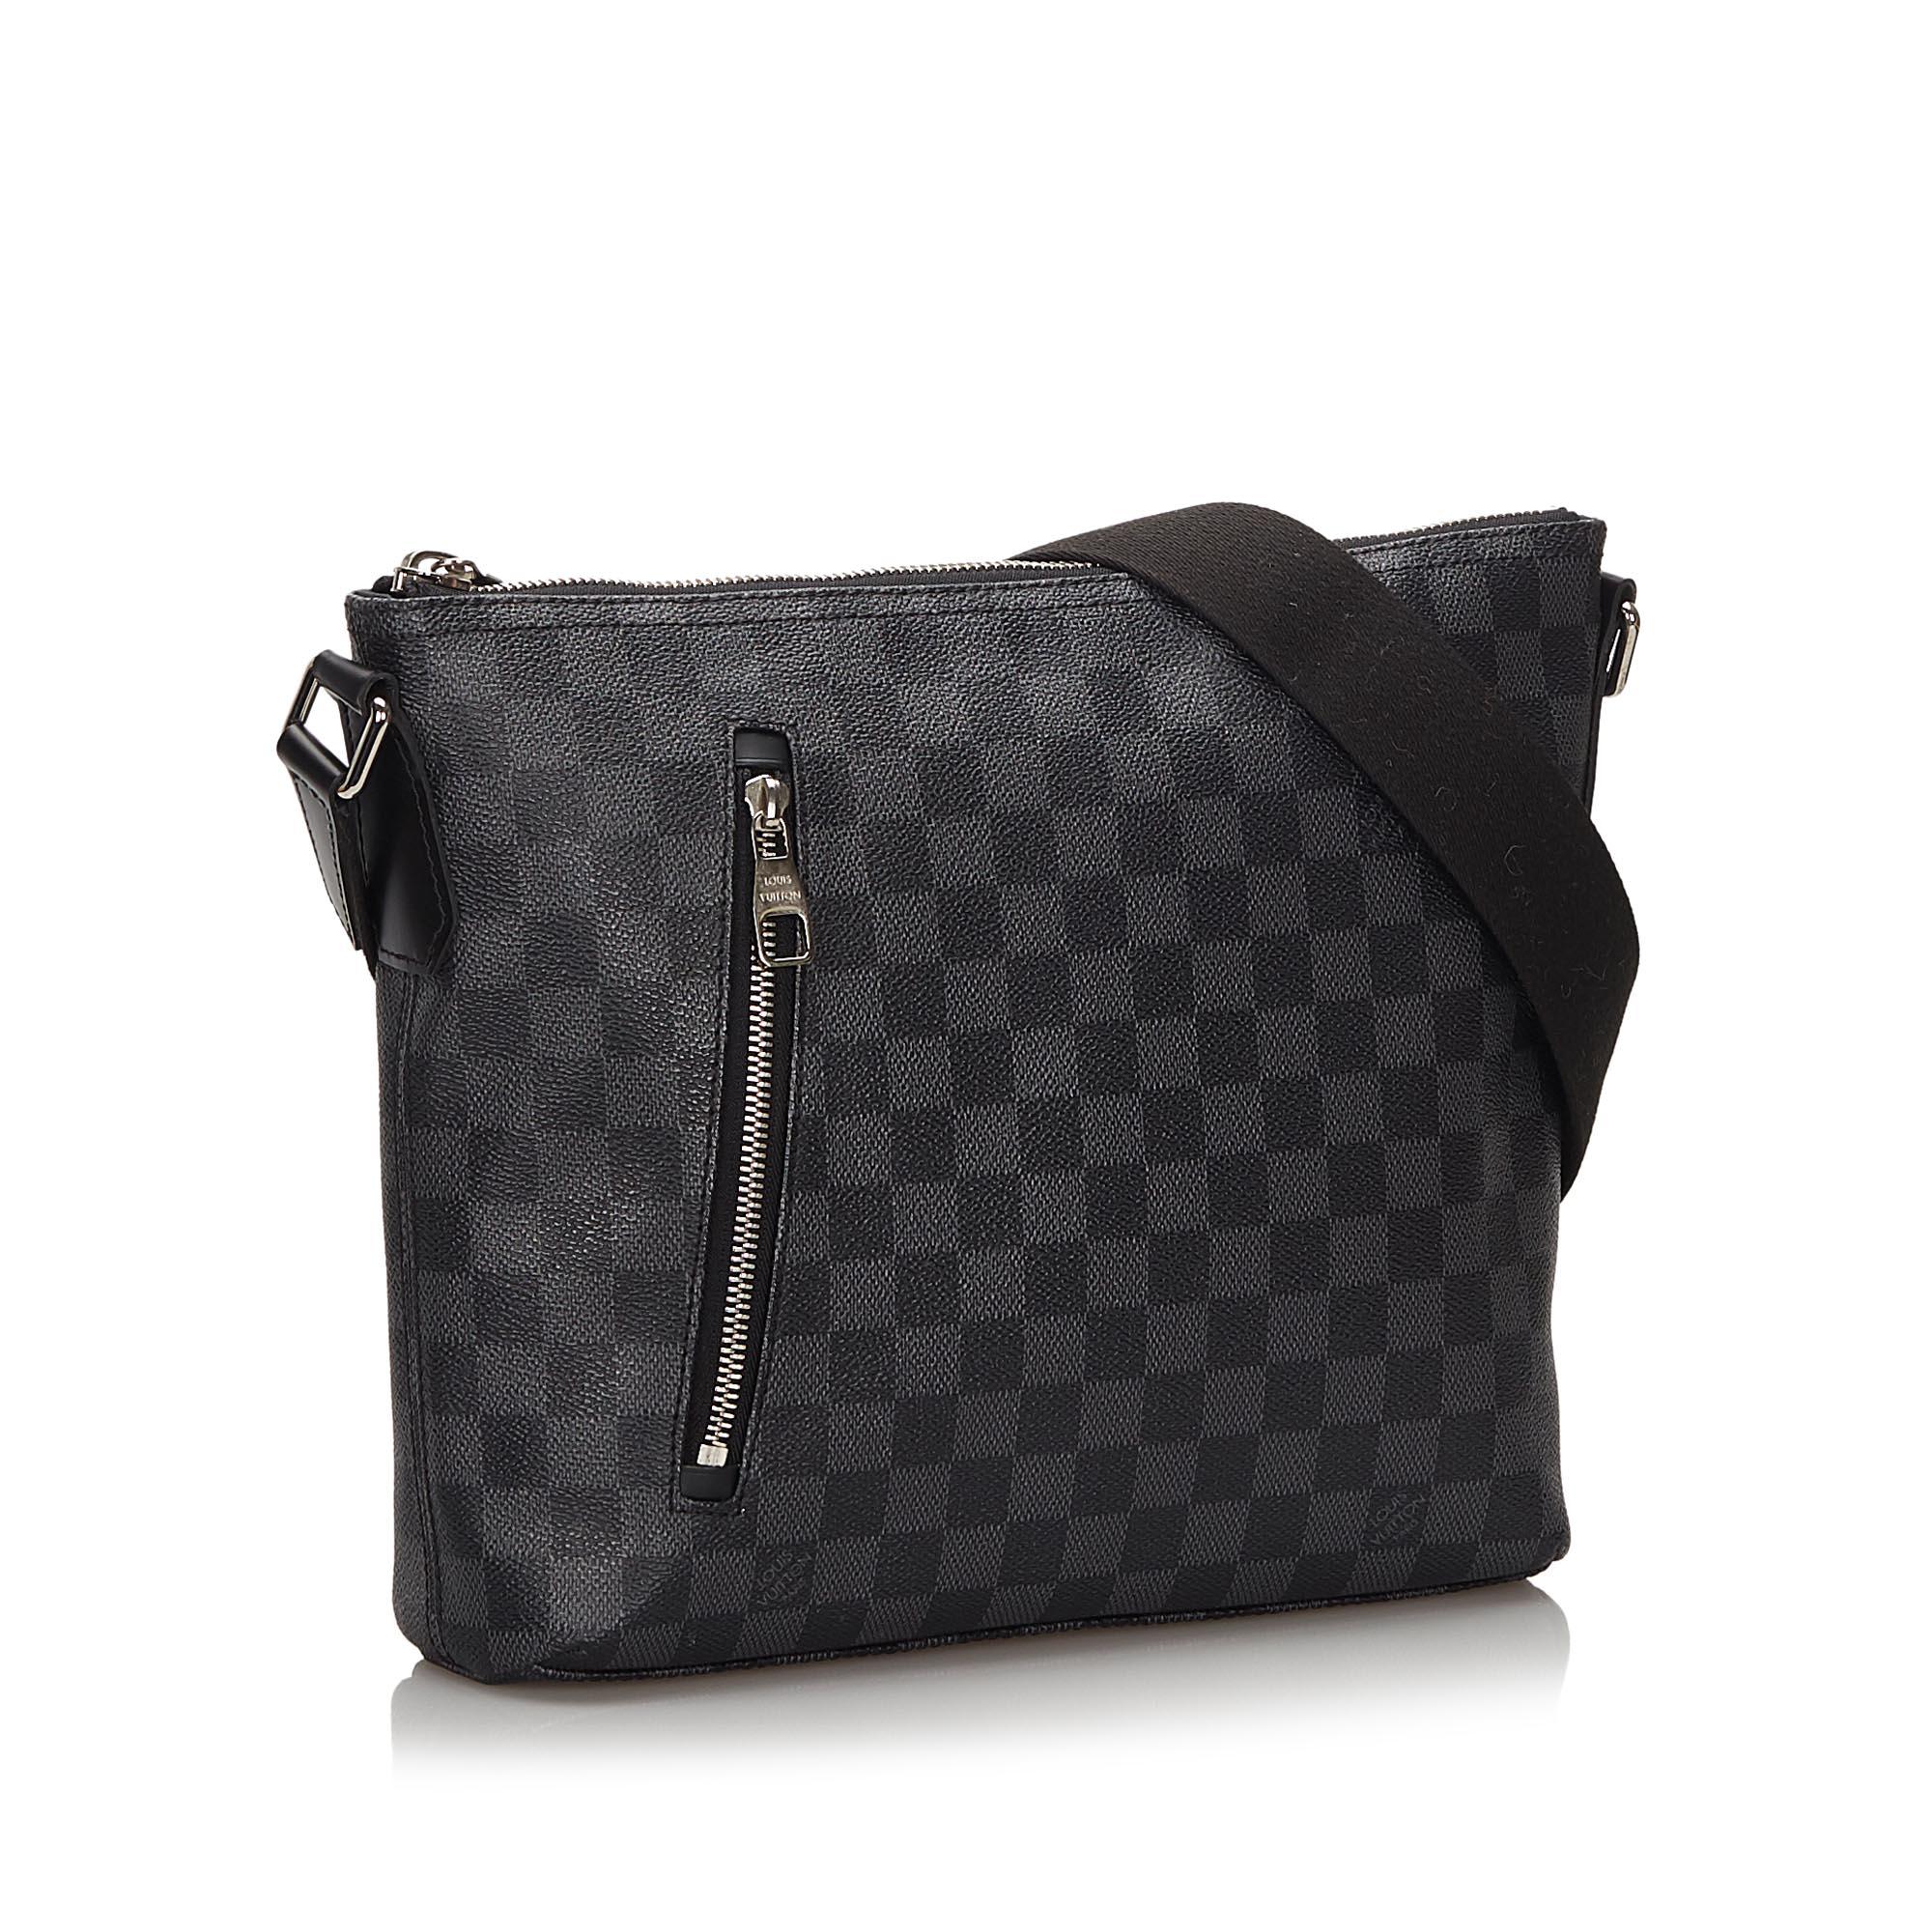 The Mick PM features a damier canvas body, a front exterior zip pocket, an adjustable flat strap, a top zip closure, and interior slip pockets. It carries as AB condition rating.

Inclusions: 
This item does not come with inclusions.


Louis Vuitton